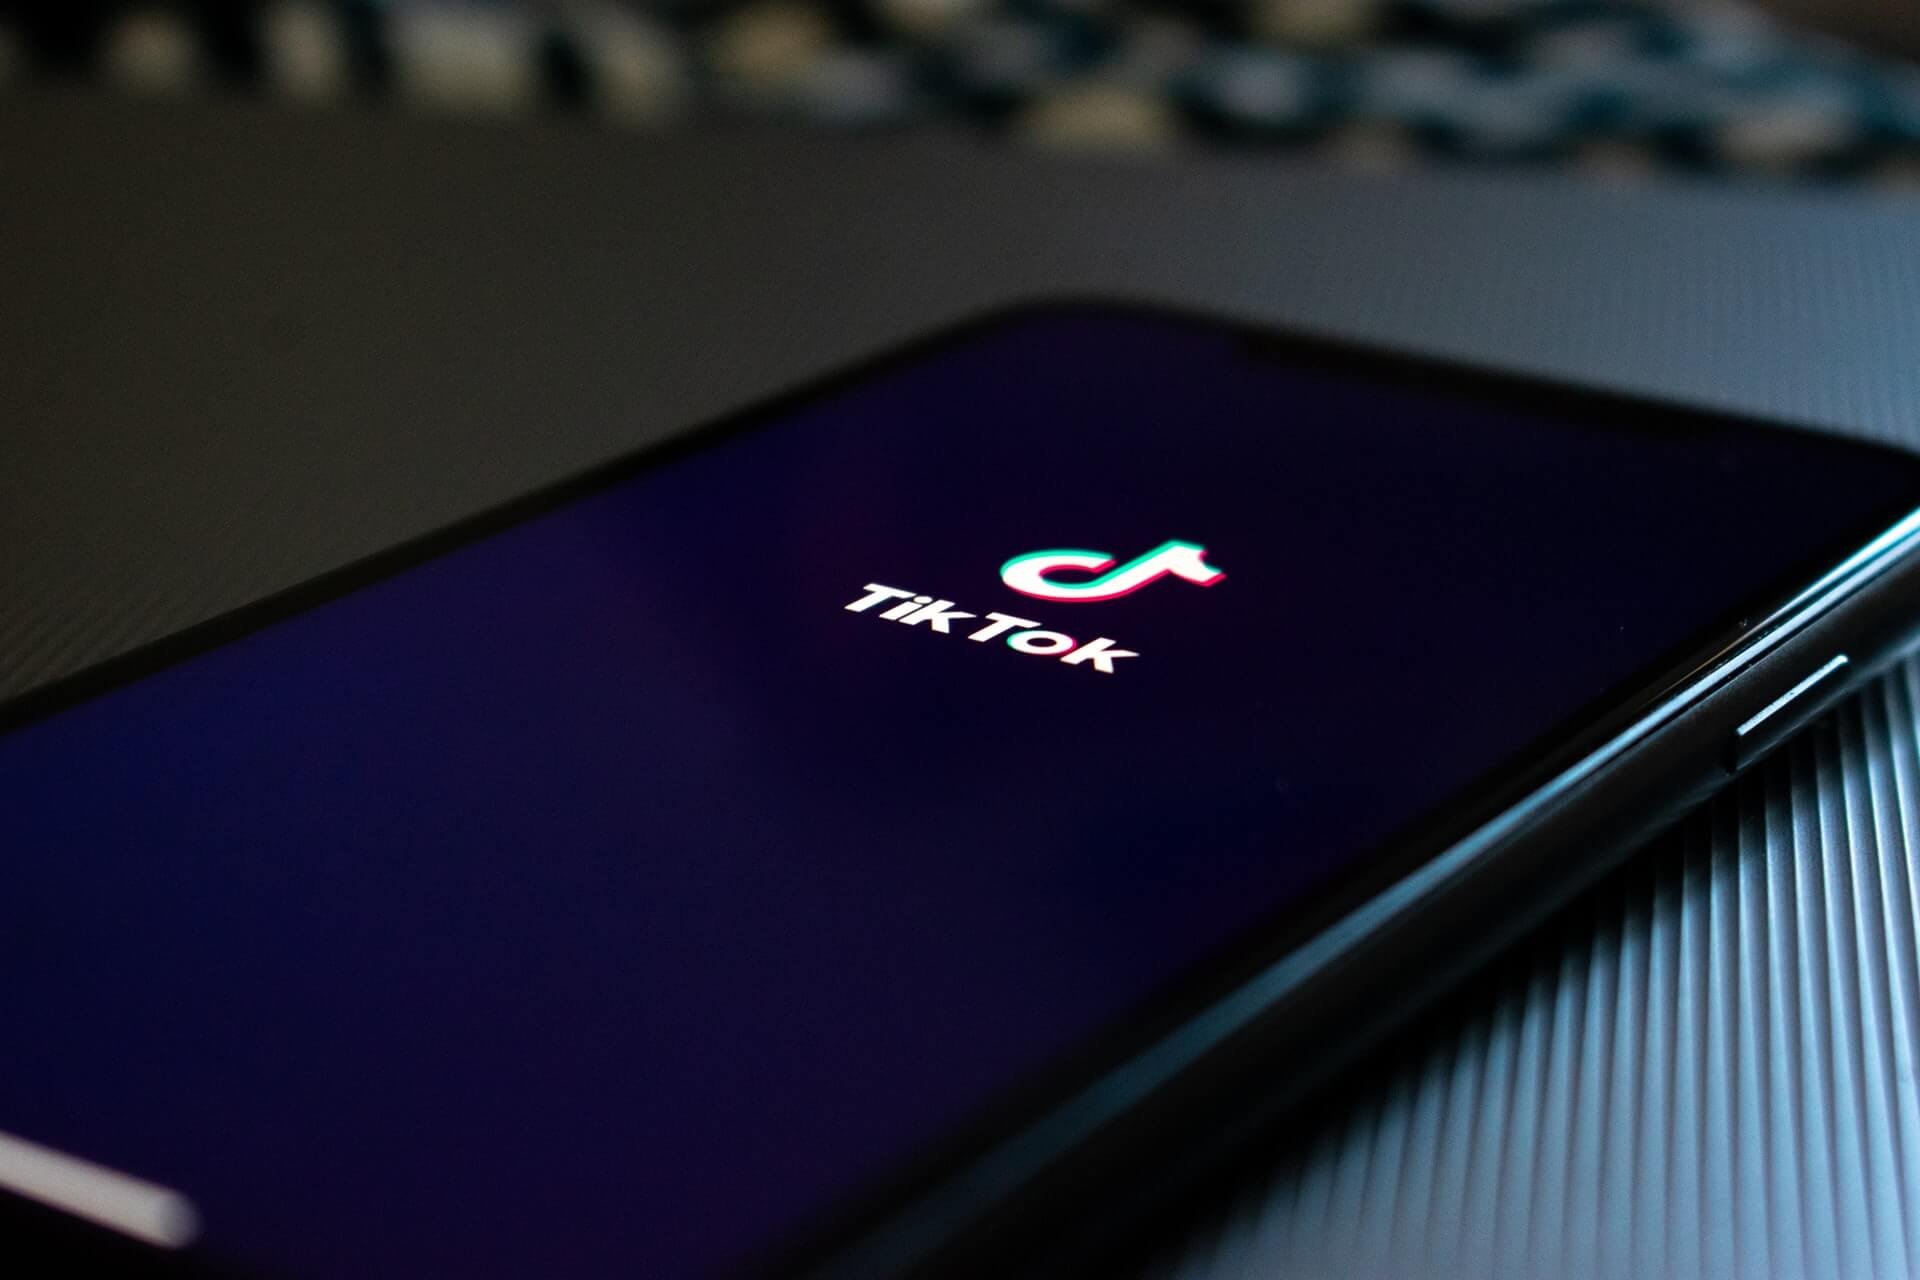 How Tools Like TikTok are Being Used to Exchange Positive Views and Thoughts During These Uncertain Times